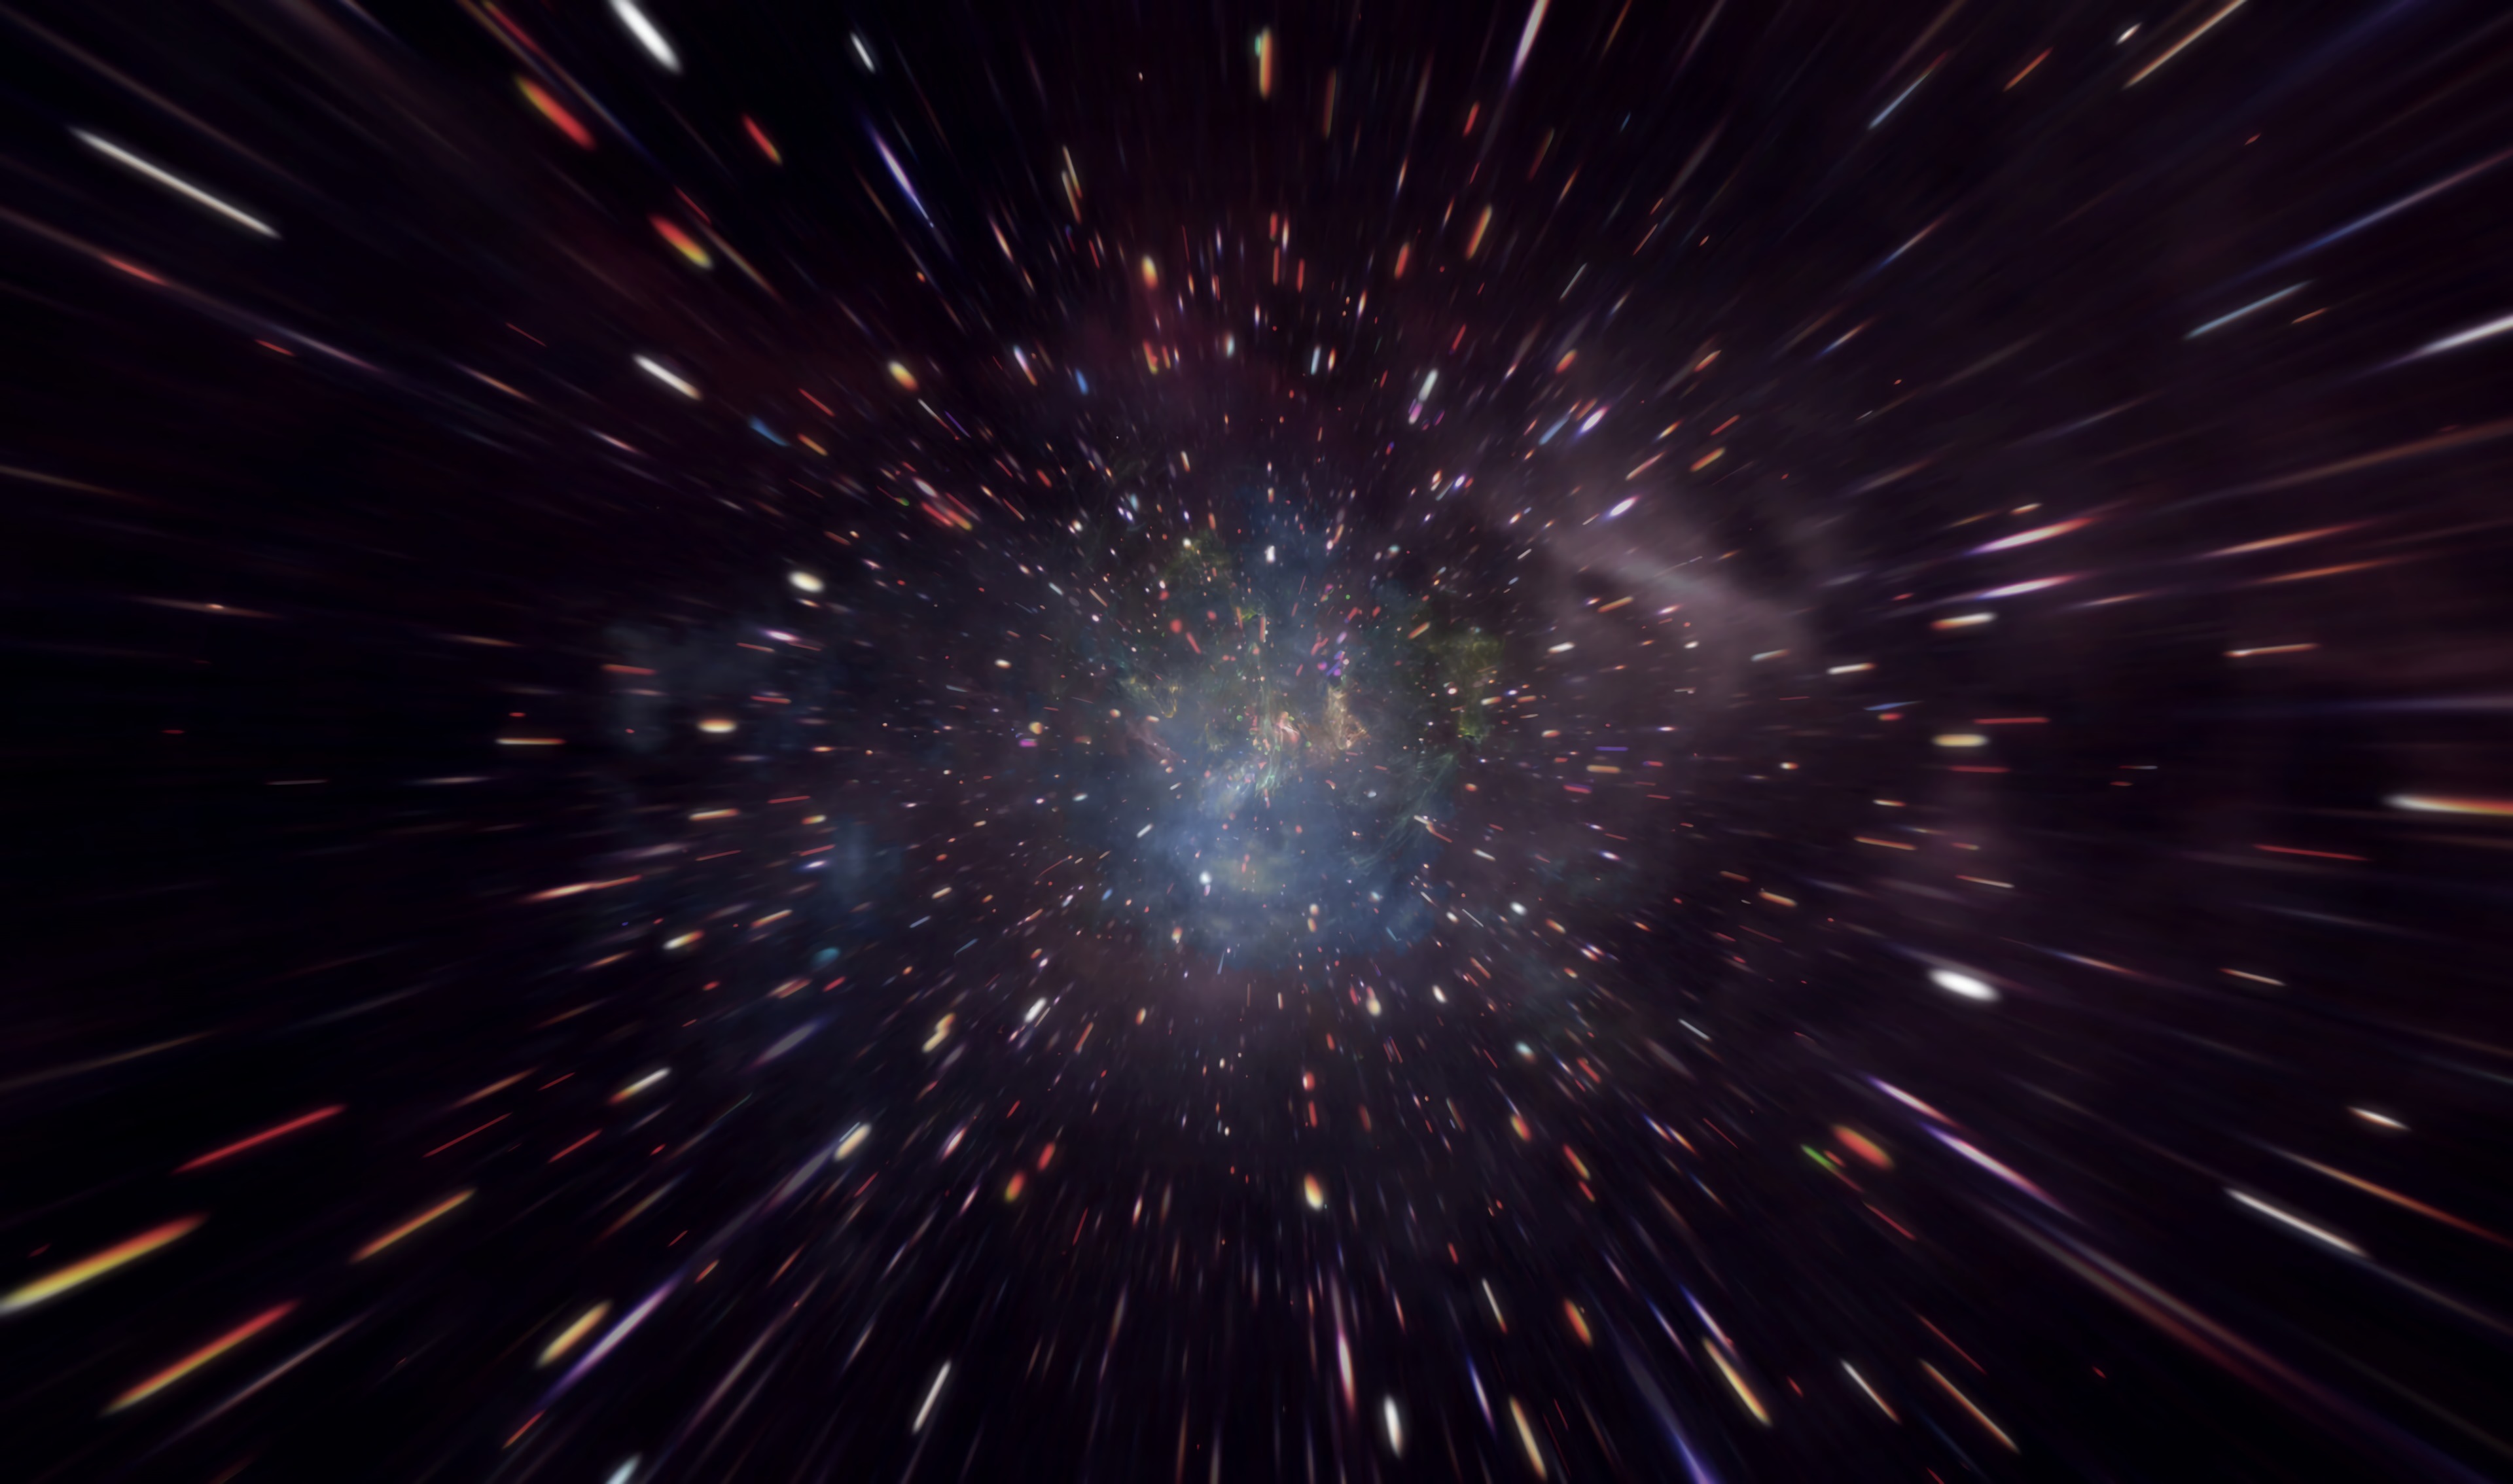 space explosion, cosmic explosion, abstract, smoke, sparks, shards, smithereens images